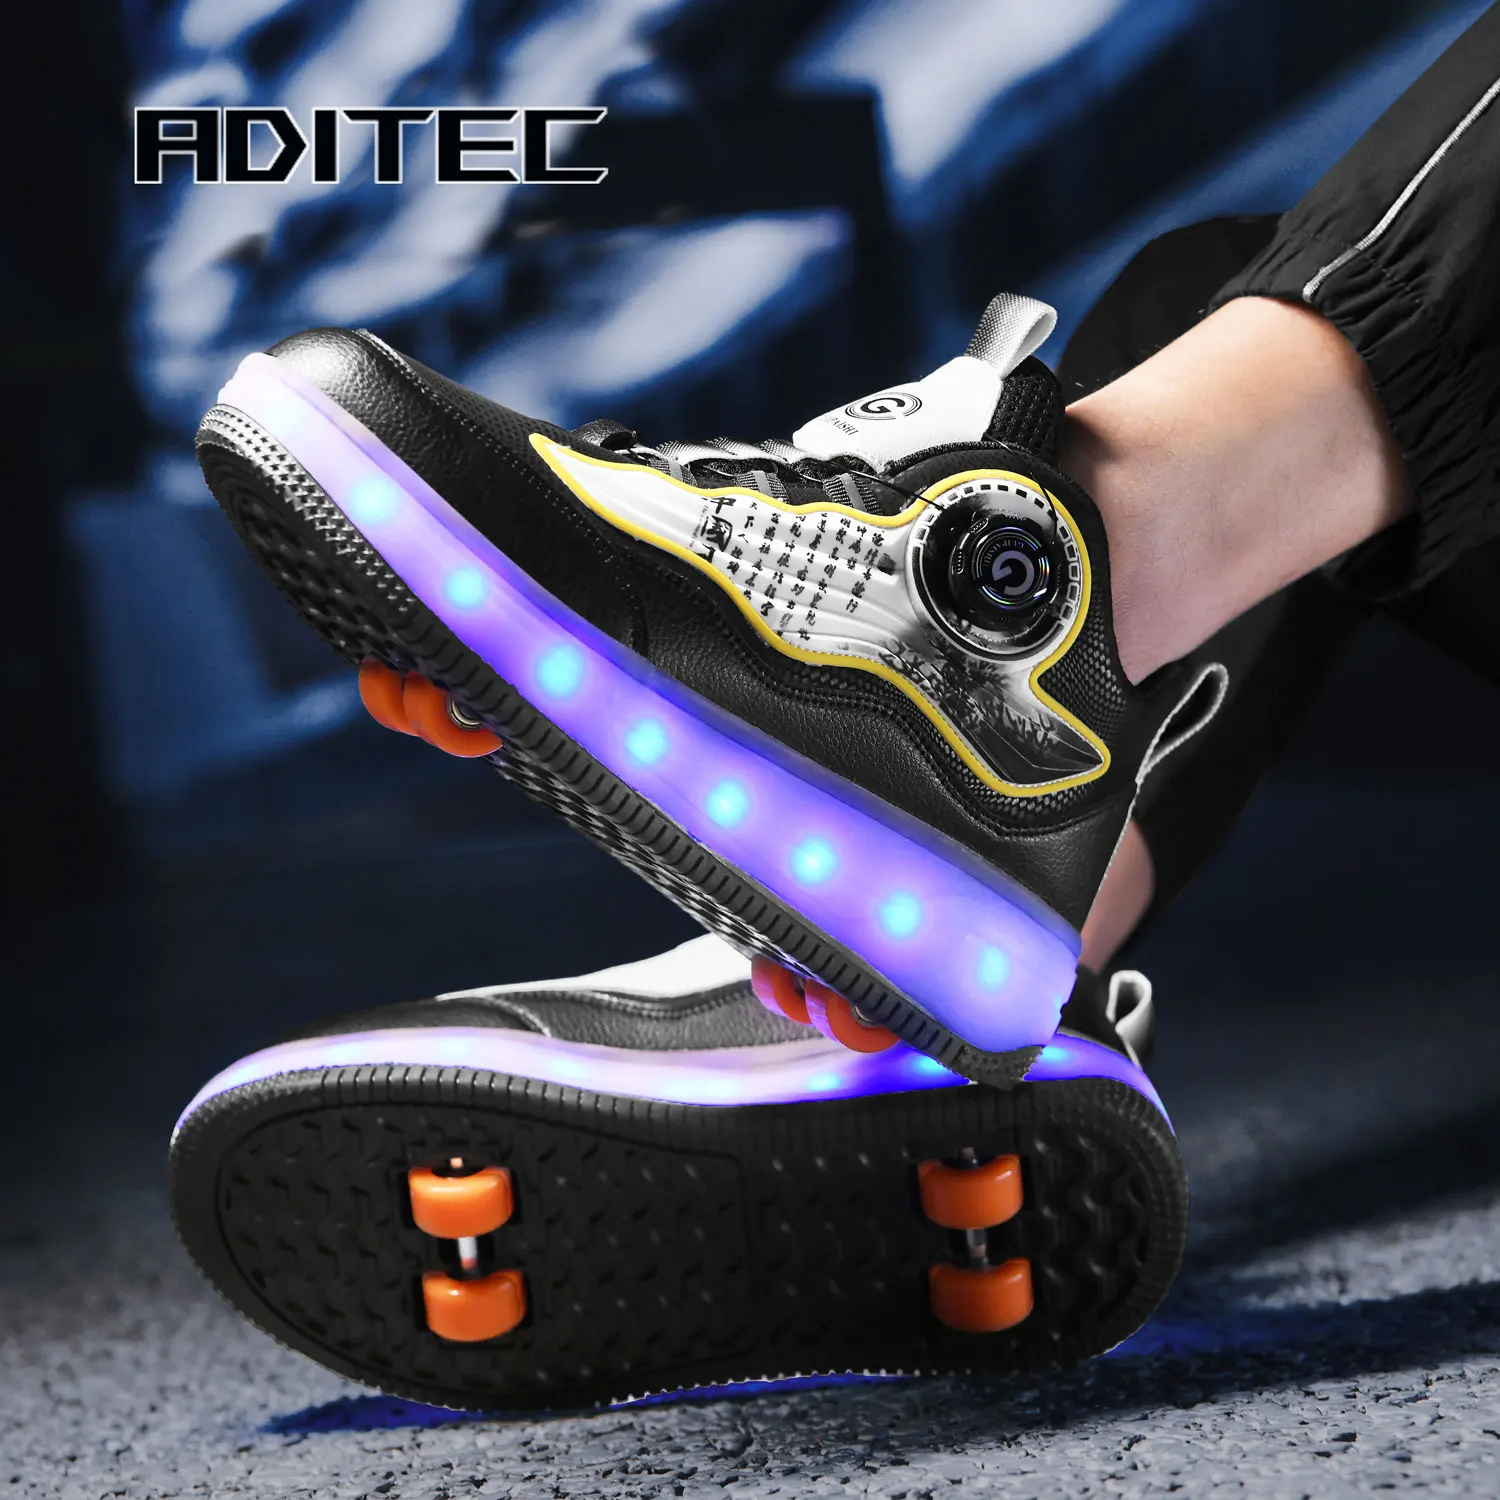 

Roller skates for kids. Outdoor training shoes. Creative gifts for boys and girls. Two-row, four-wheeled parkour shoes